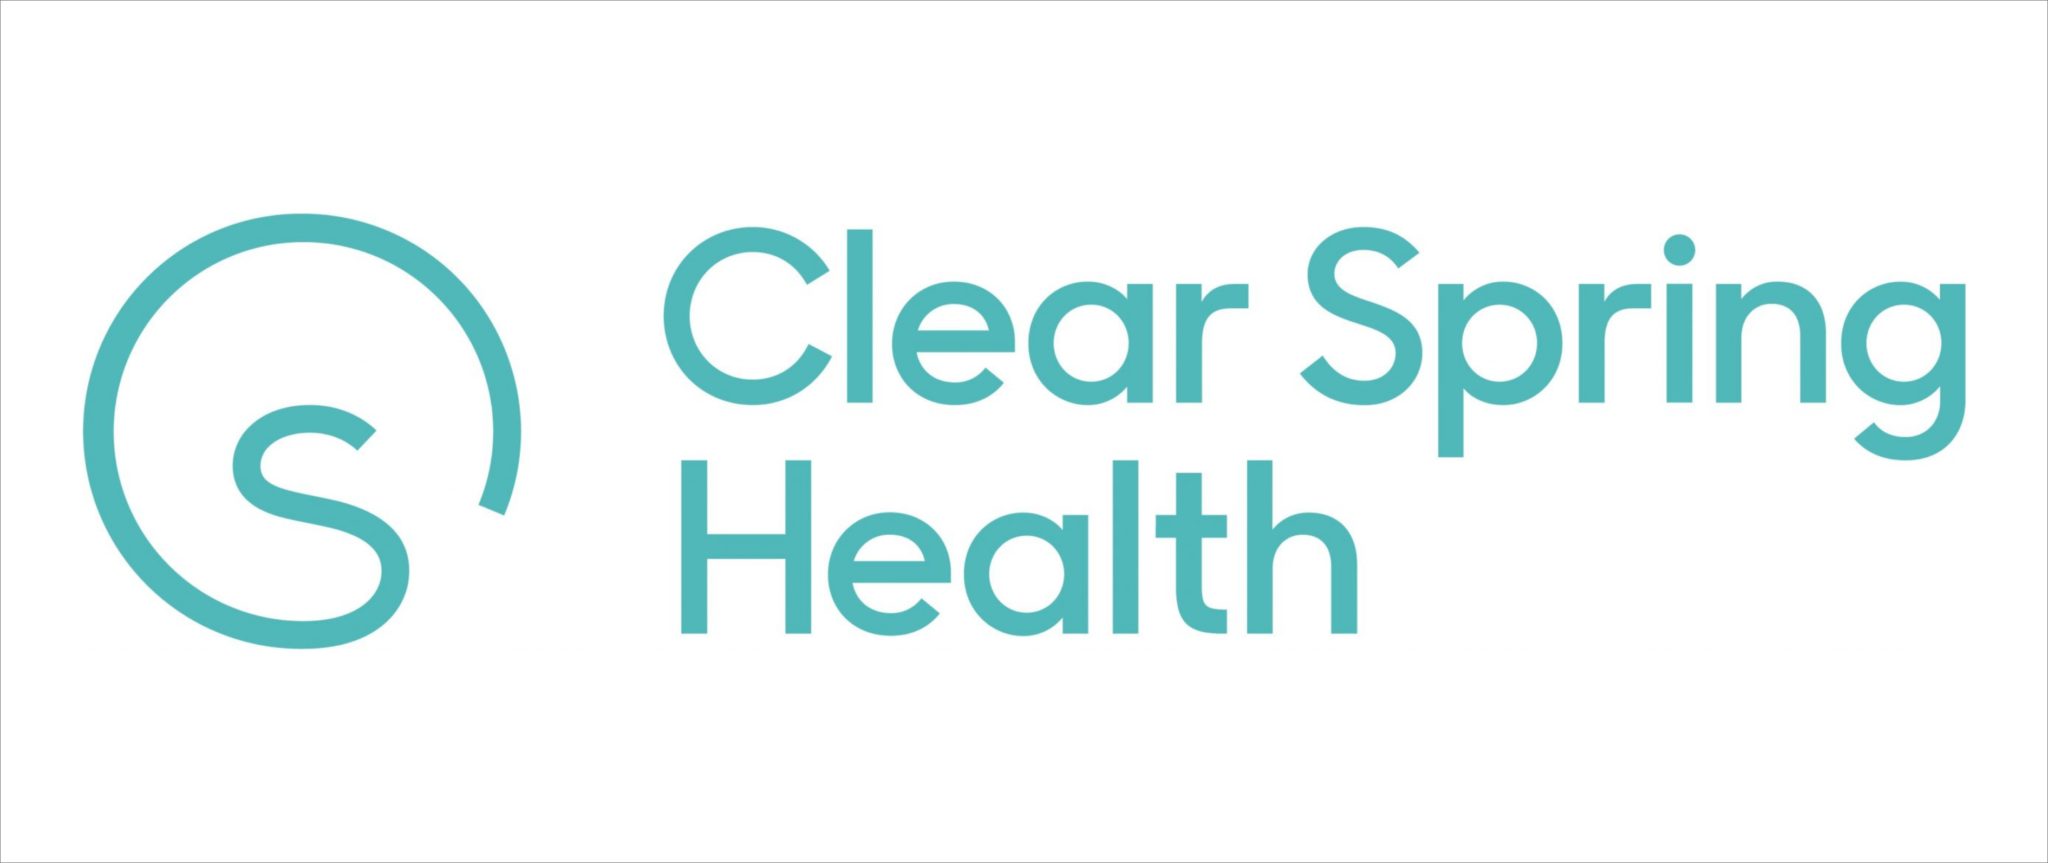 Clear Spring Health 2022 Certification Instructions GarityAdvantage